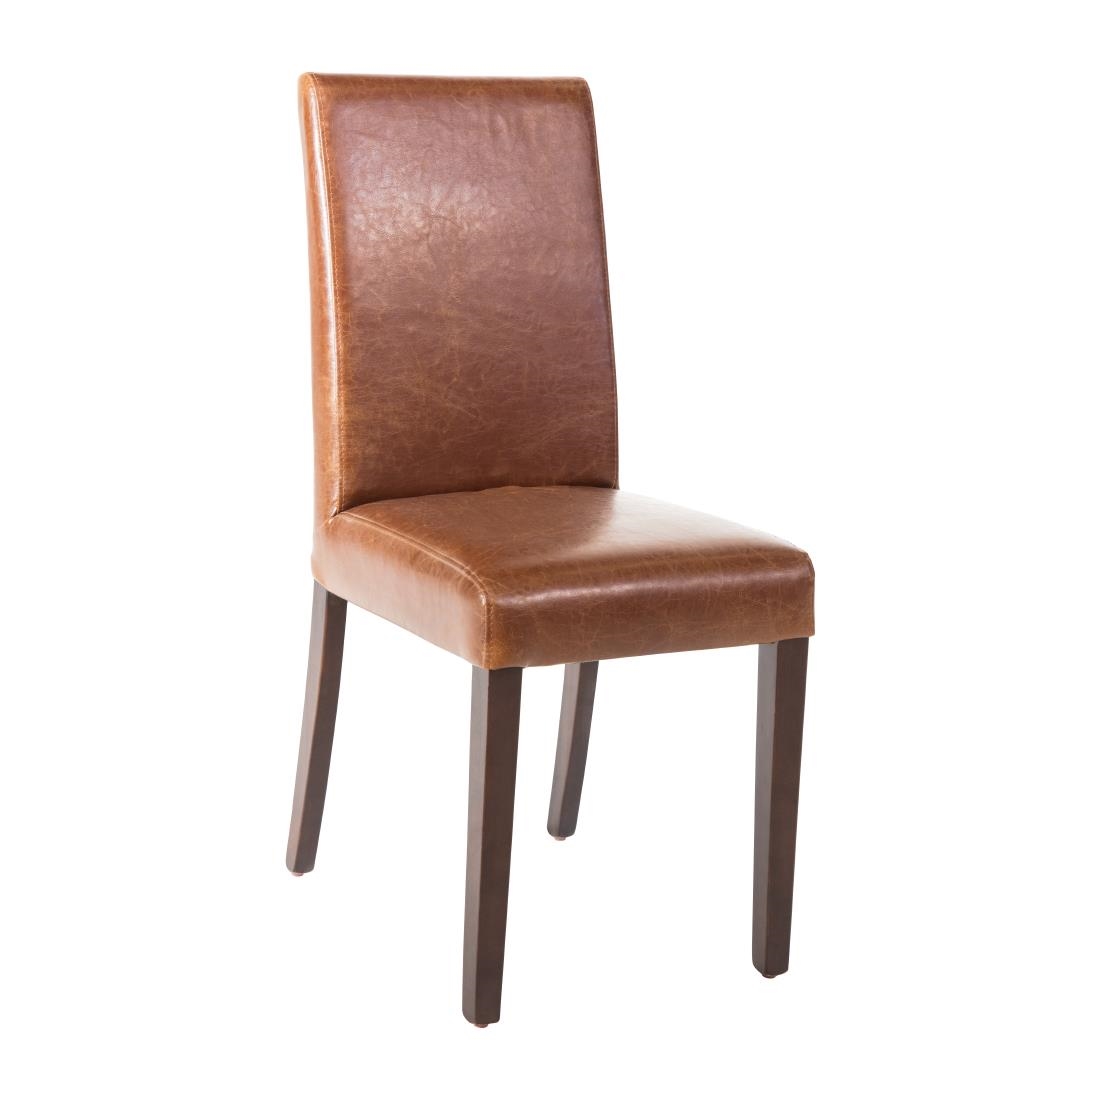 Faux Leather Dining Chair - Antique Tan